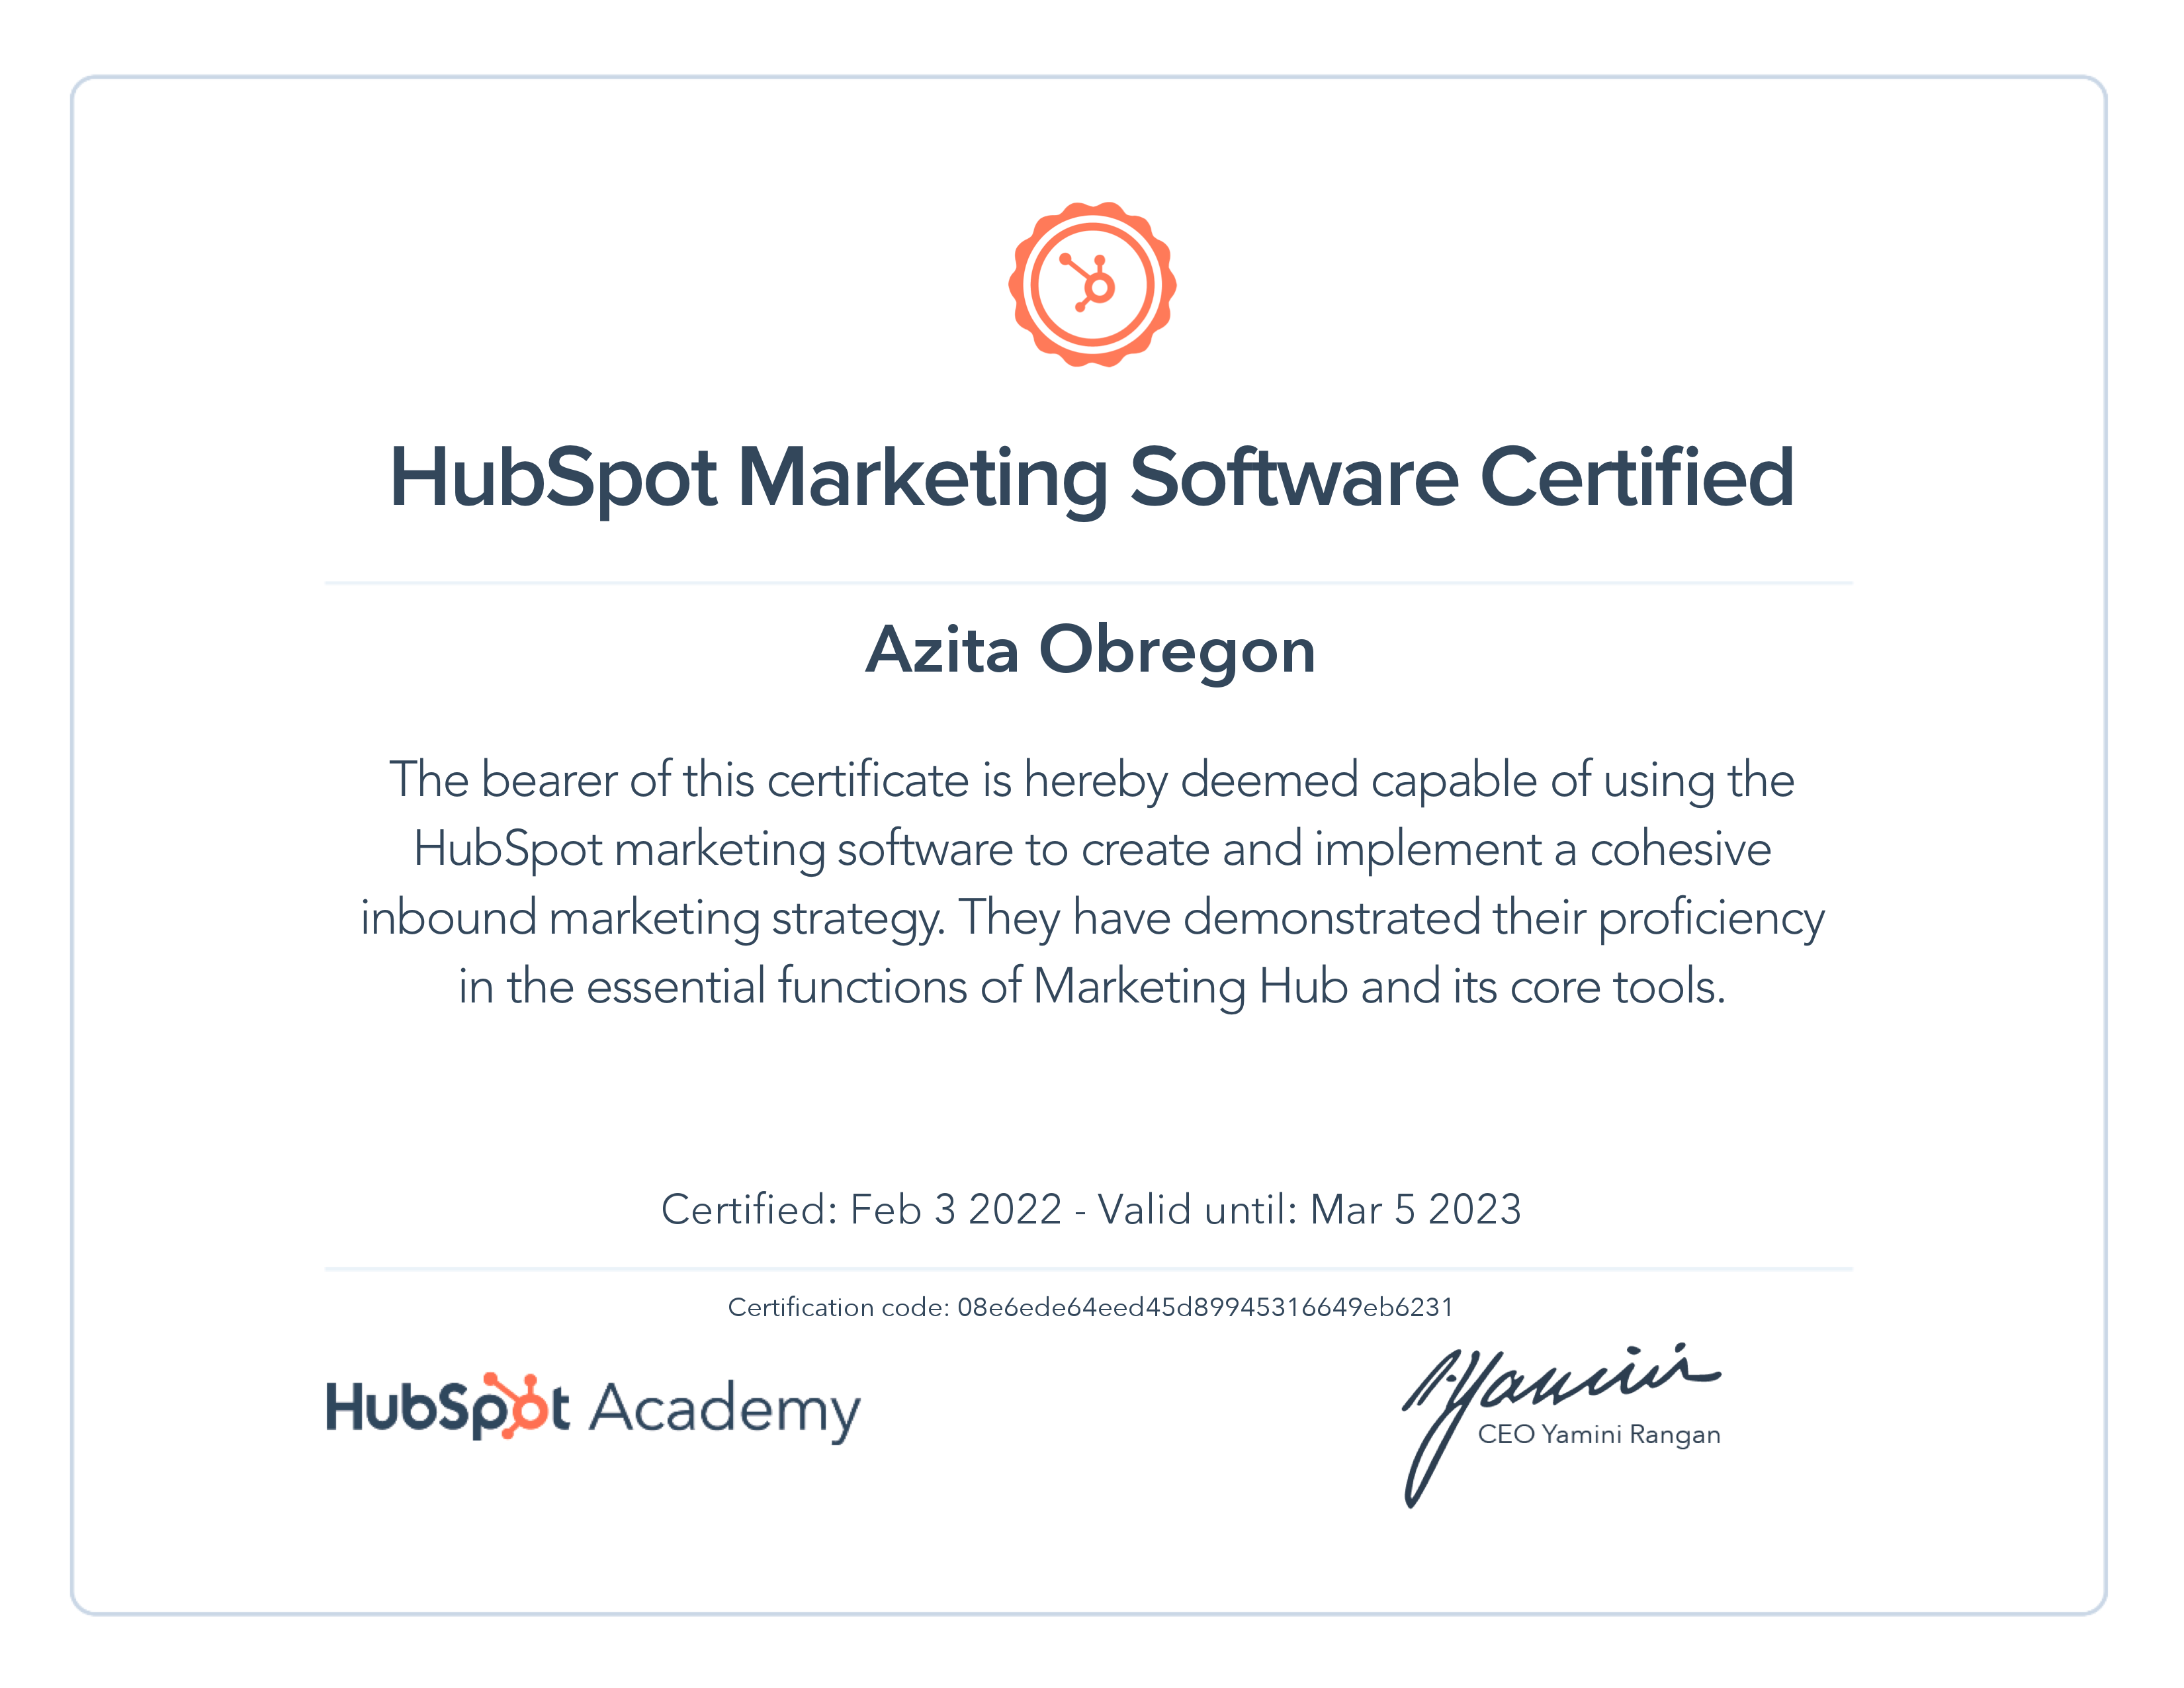 We are now Hubspot Marketing Software Certified